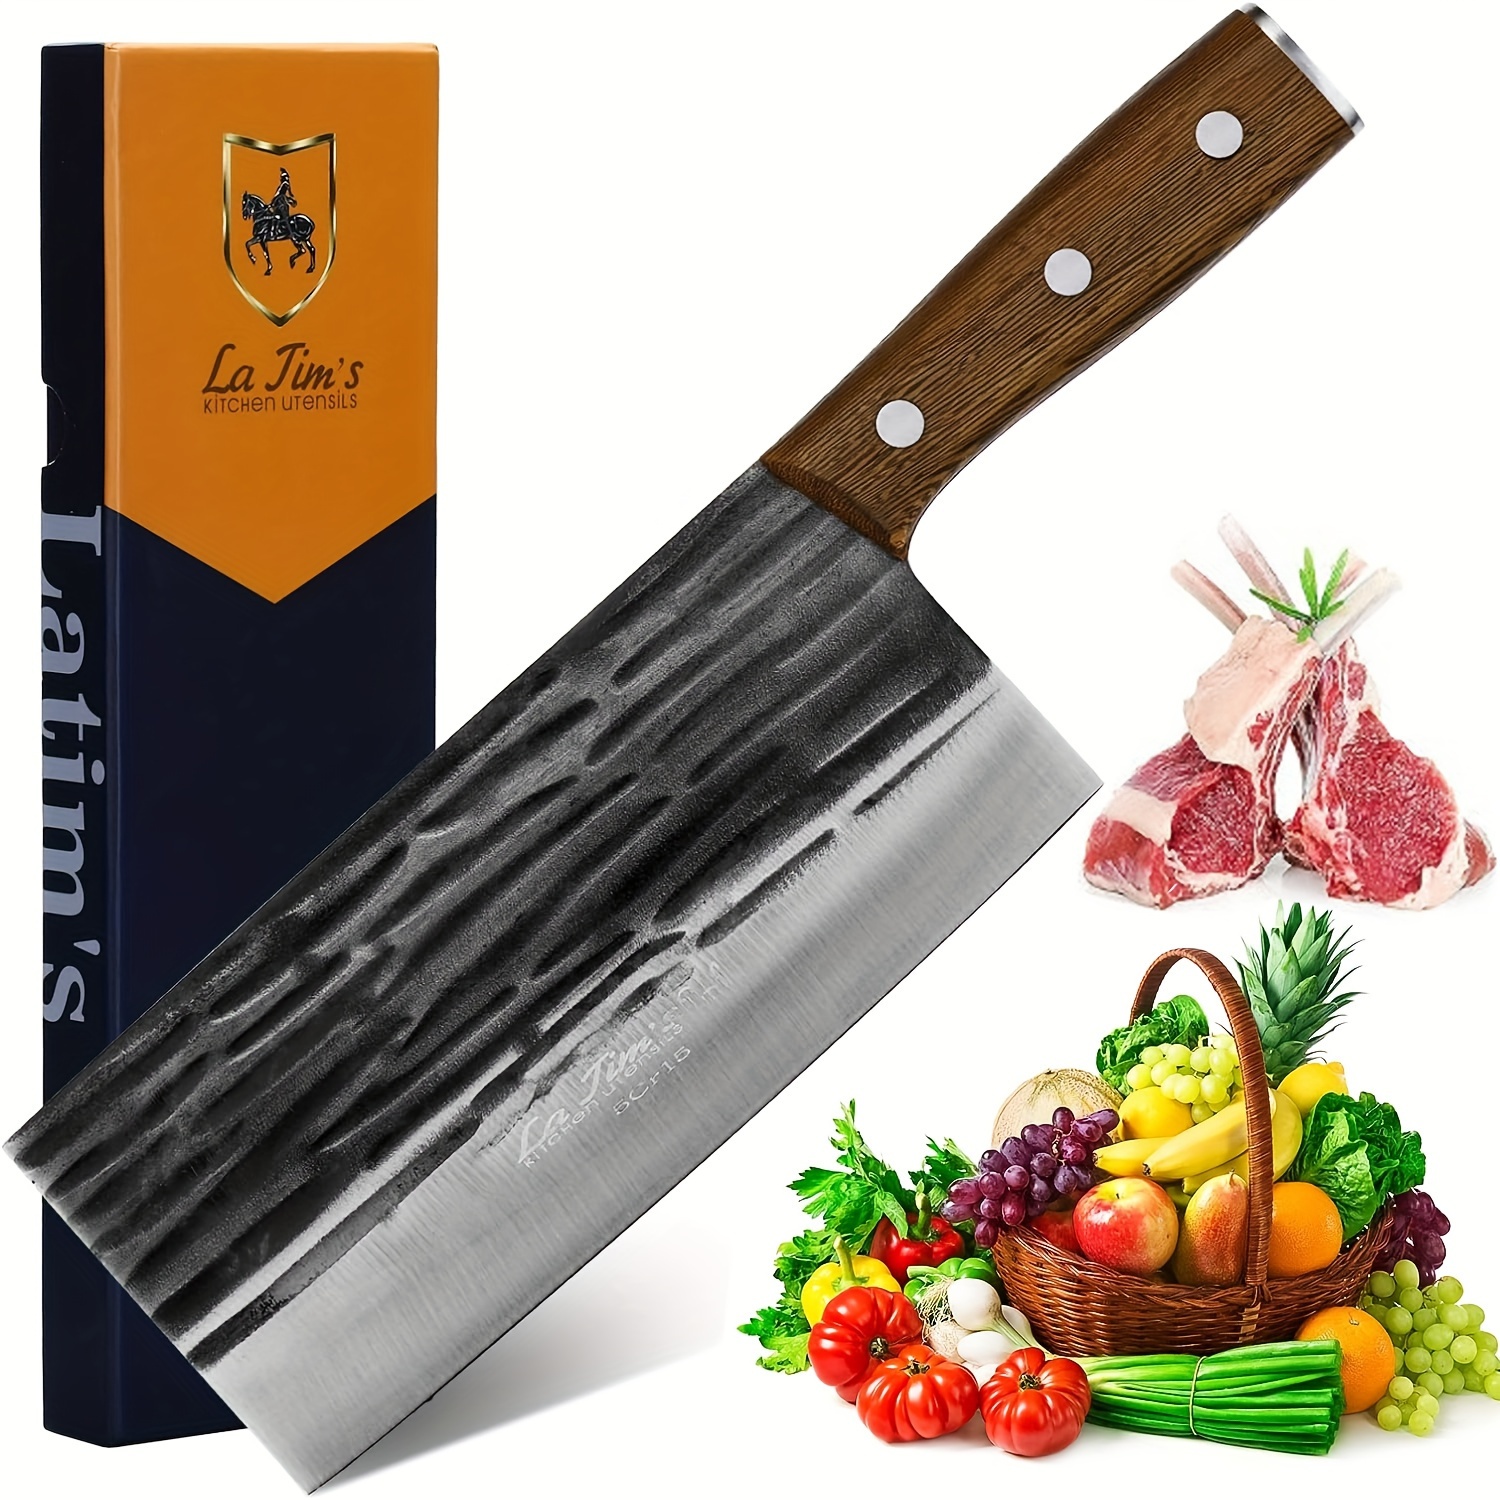 

Latim's Meat Cleaver 8 Inch, Professional Chef Knife For Meat Cutting, High Carbon Stainless Steel Kitchen Knife With Anti-slip Wooden Handle